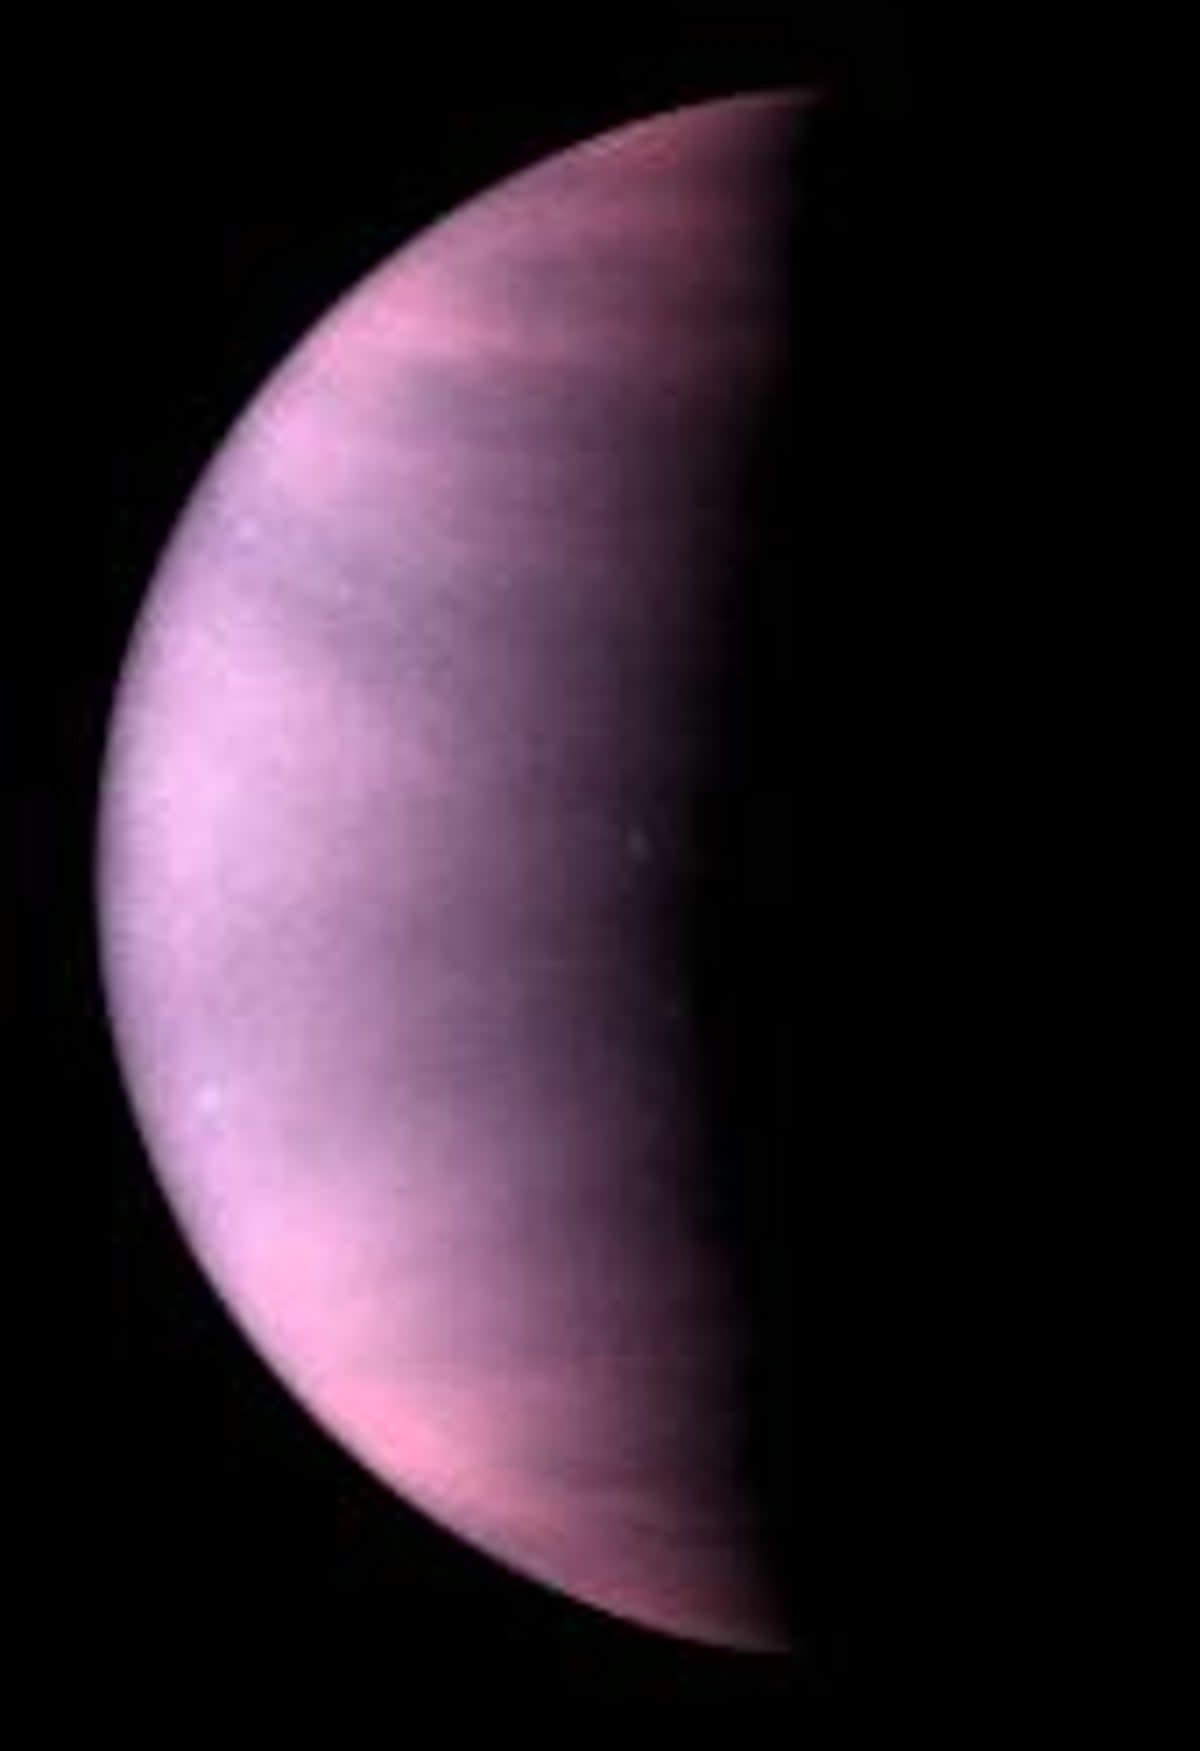 The clouds of Venus as seen by the Hubble Space Telescope (Nasa)